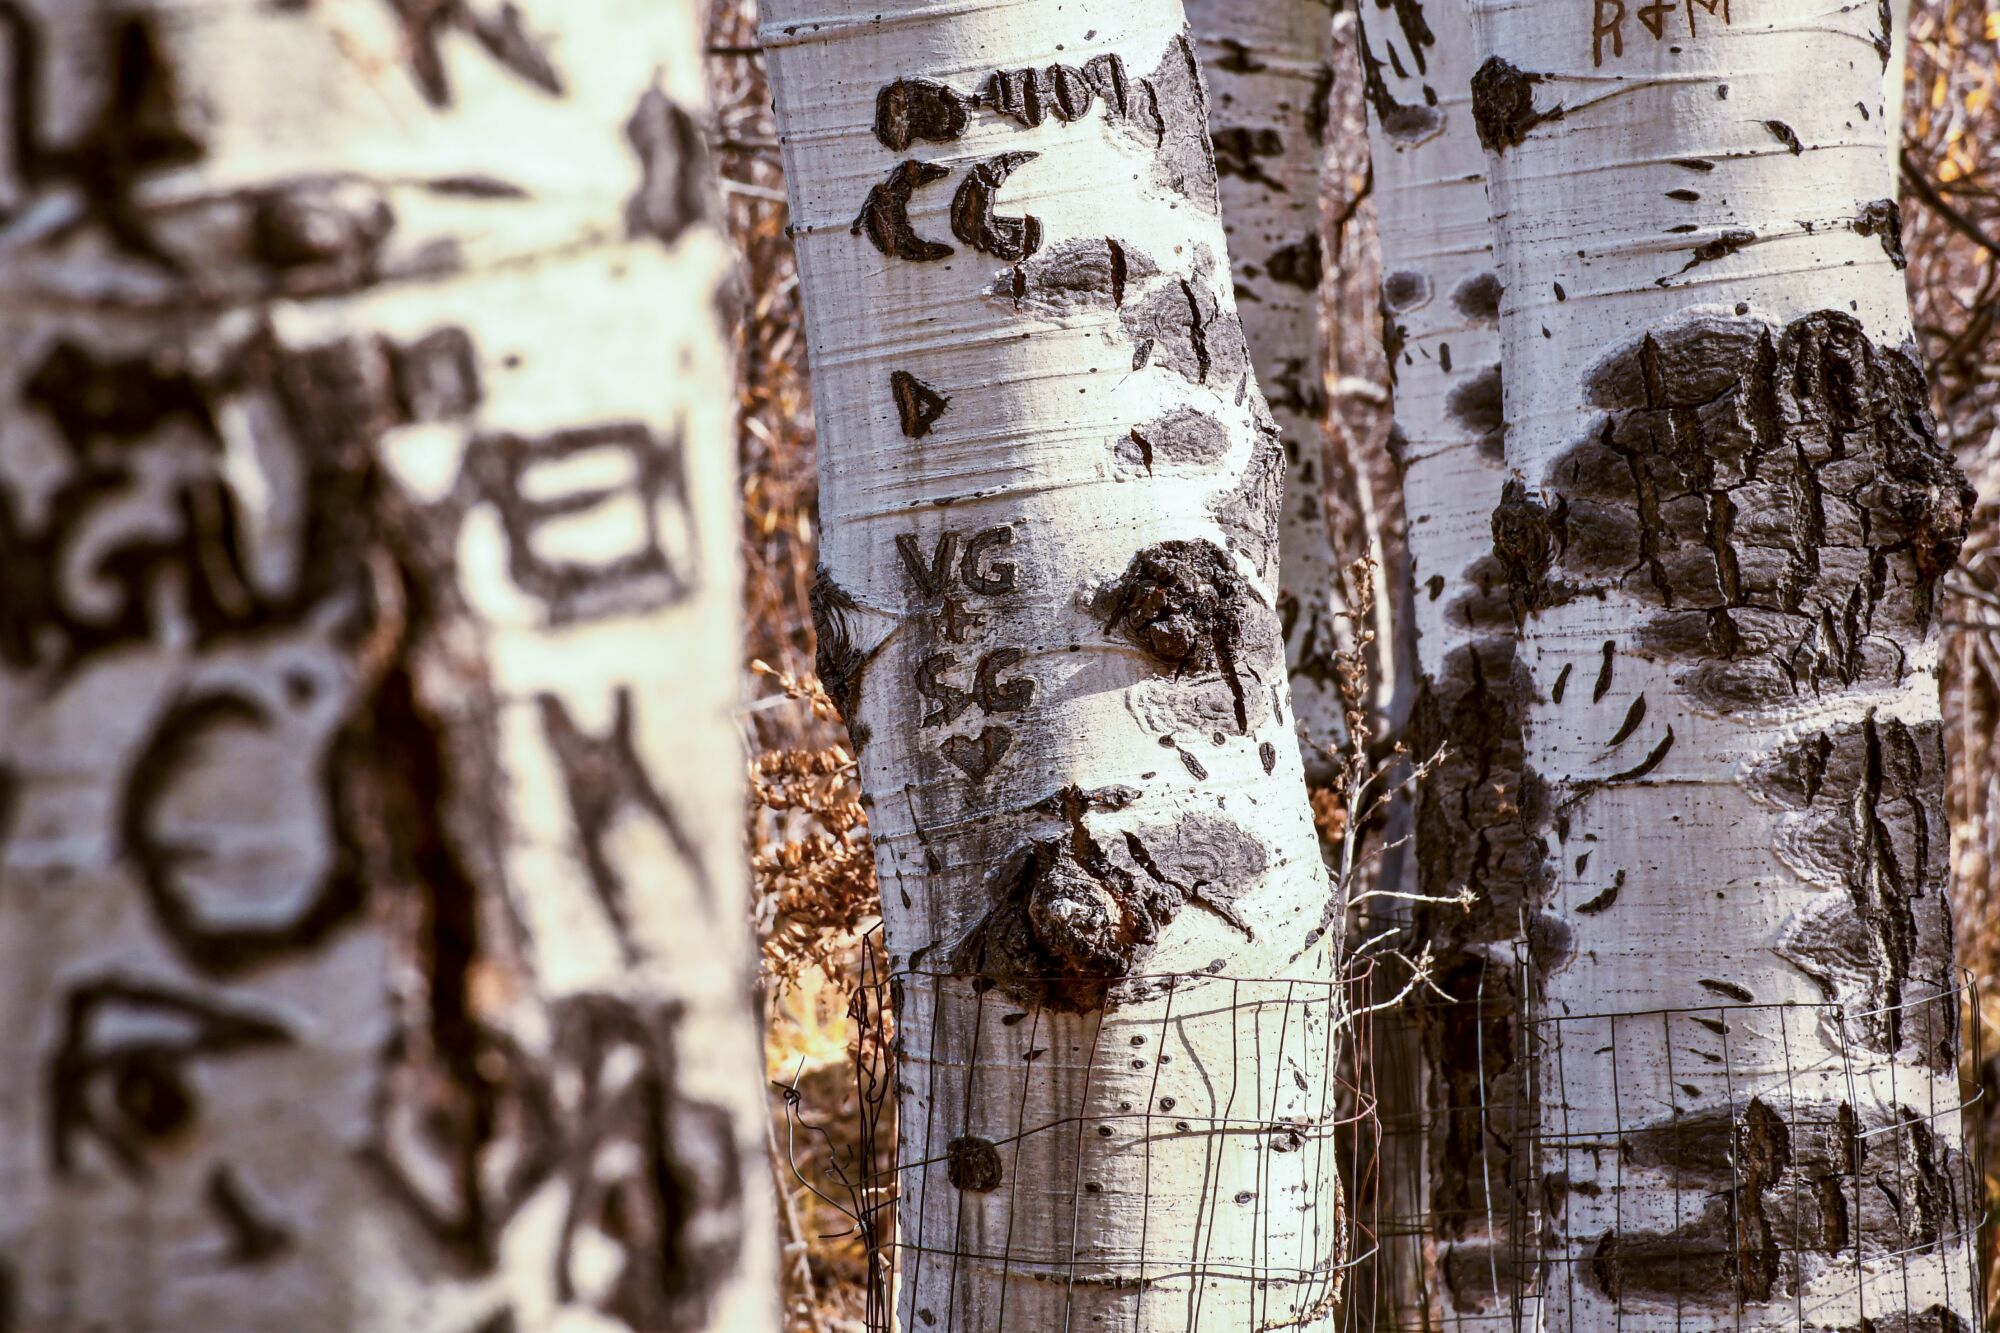 On Lake Tahoe's south shore, visitors can learn about the region's falling aspen population.